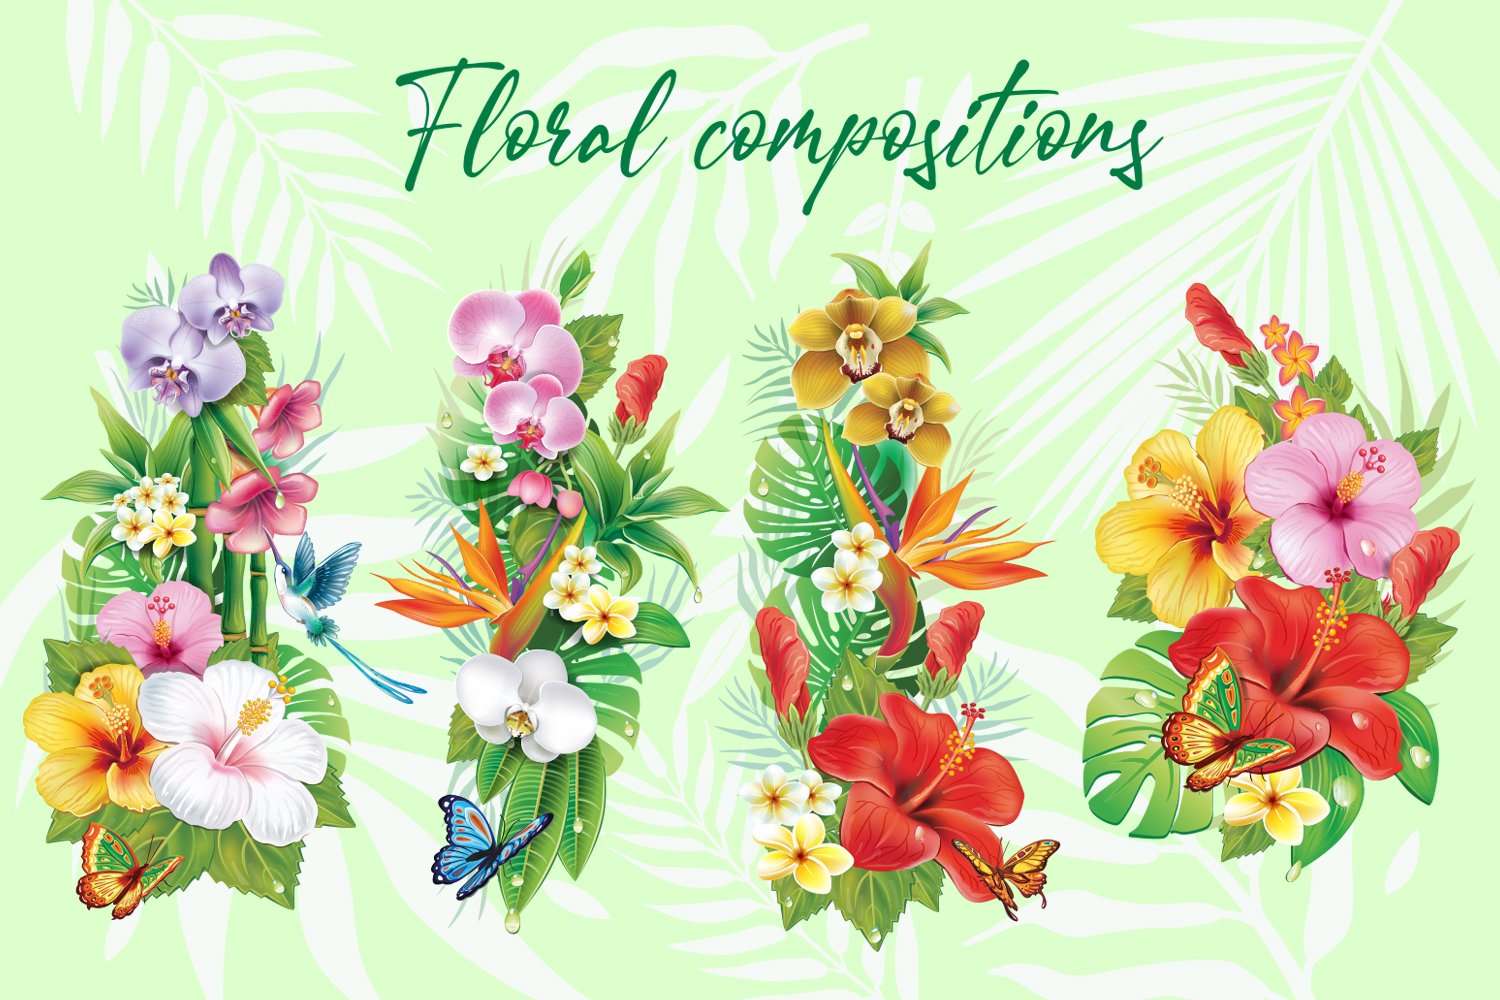 Some floral compositions.